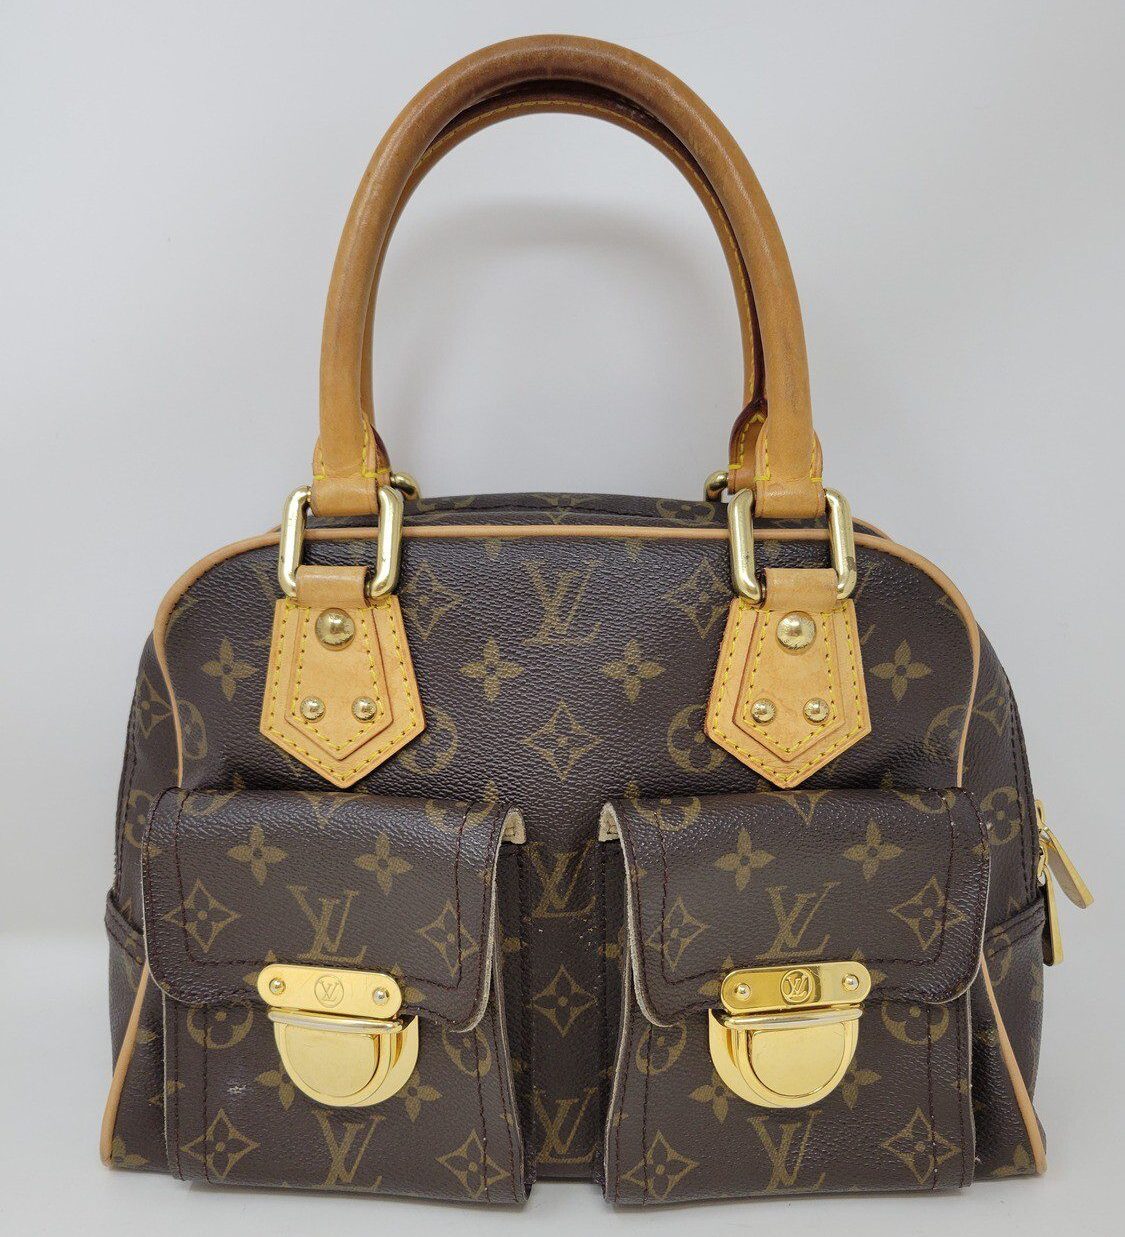 We Buy Louis Vuitton, Gucci and More! - Premier Pawn